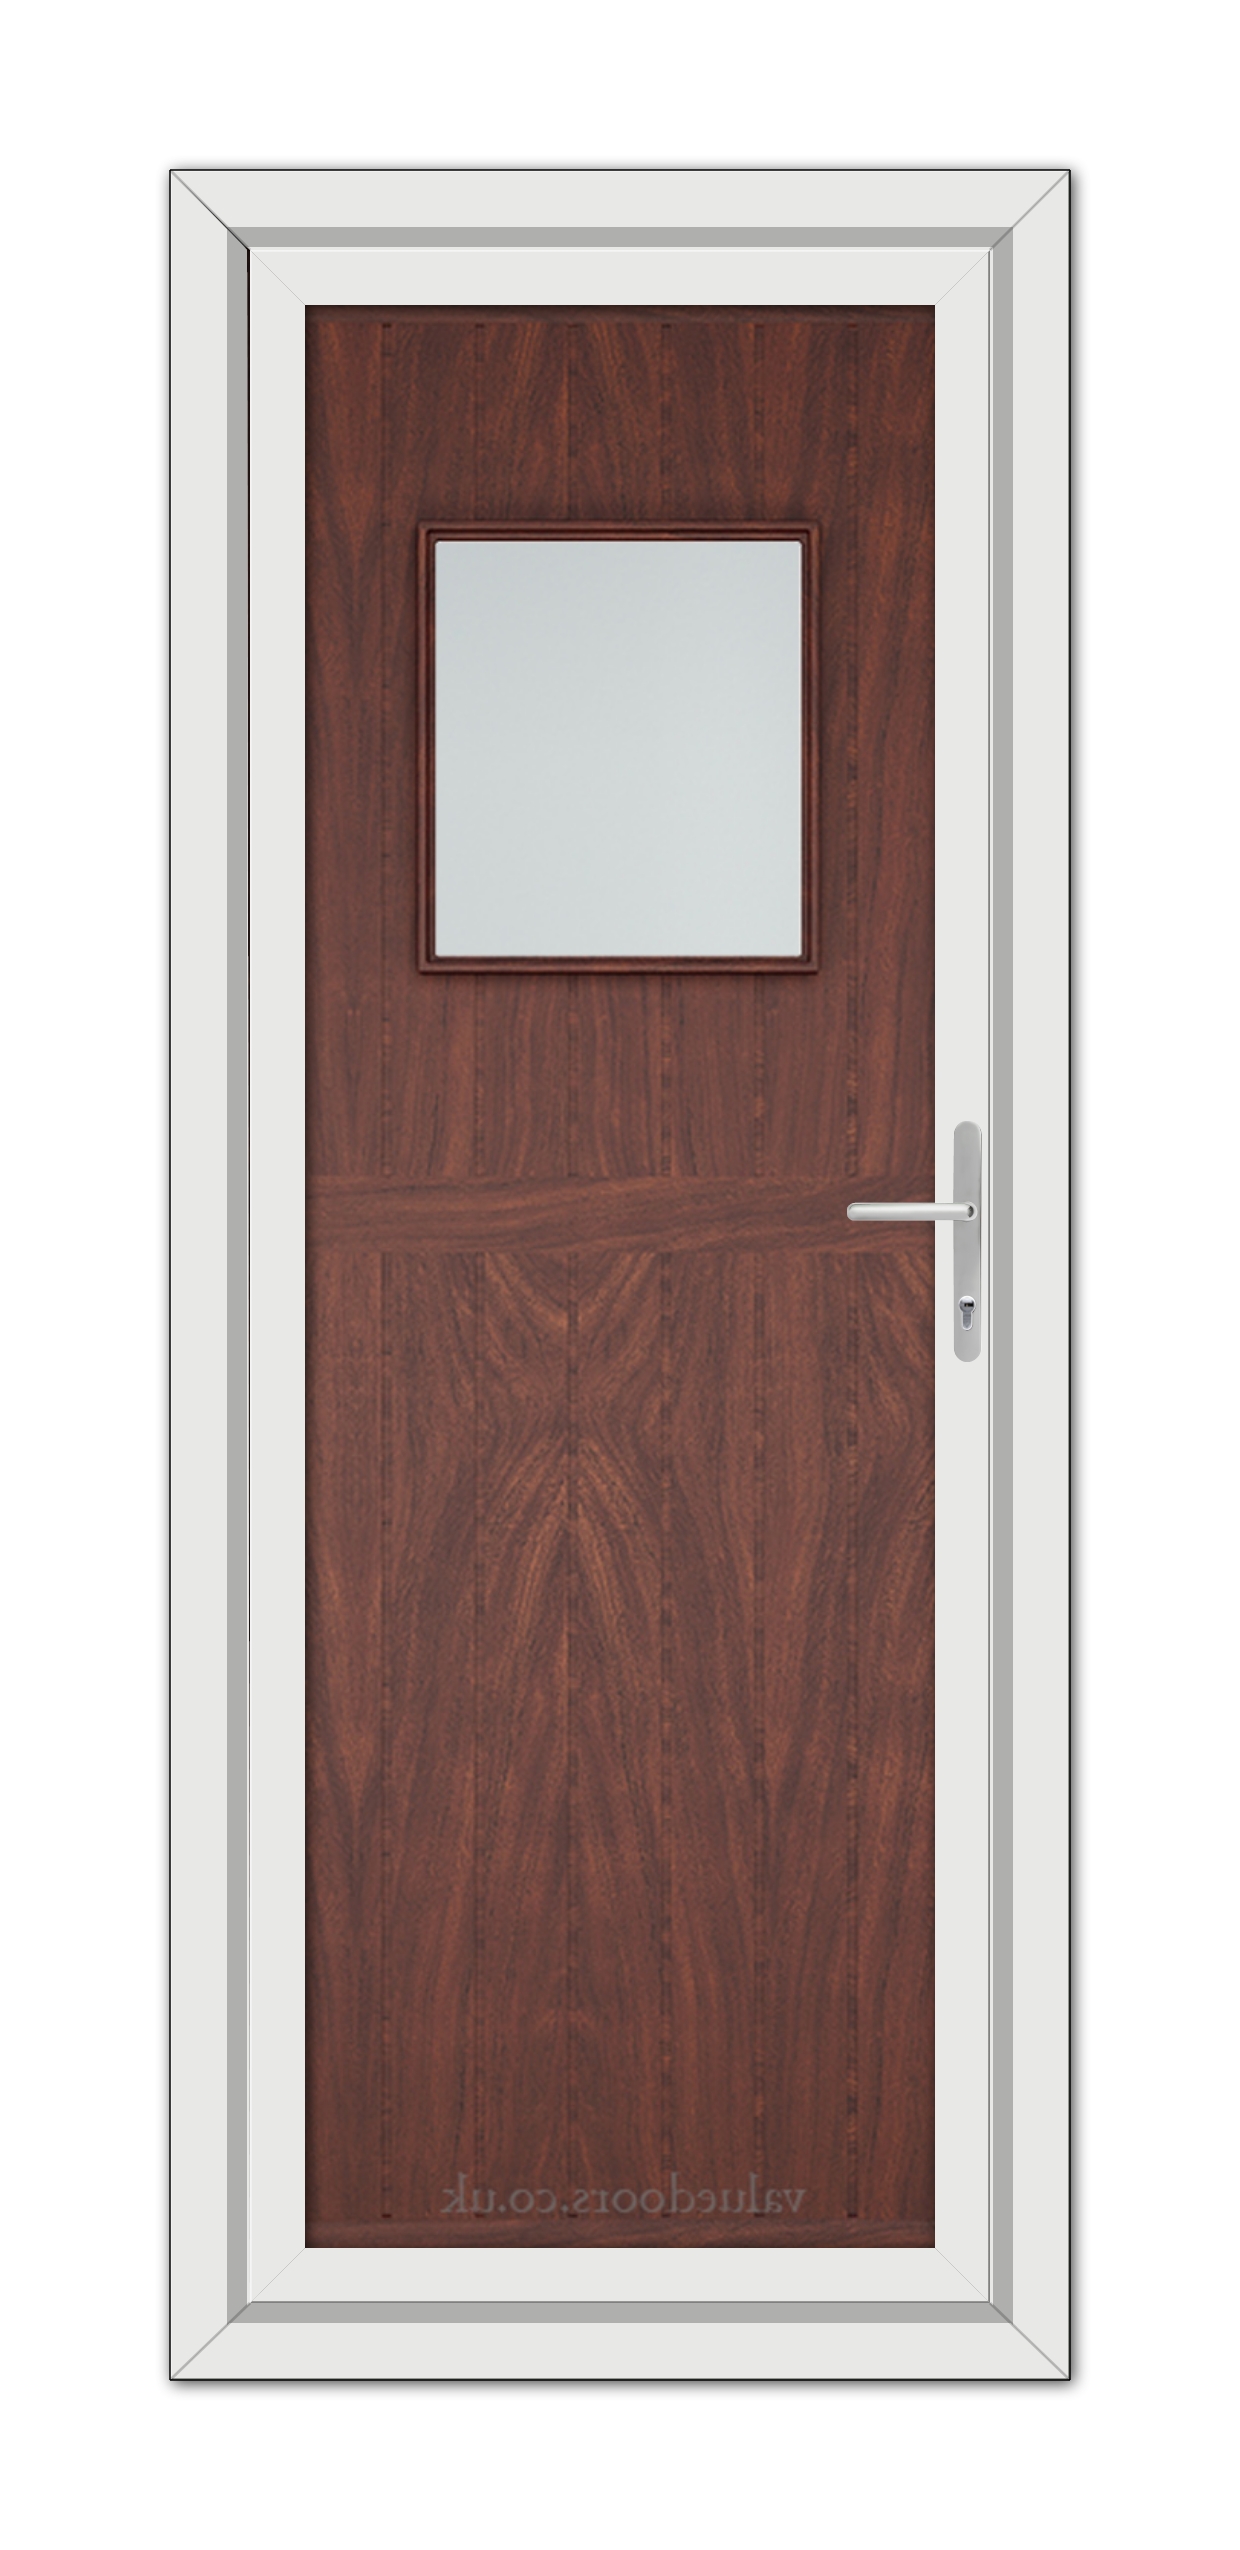 A modern door featuring a Rosewood Chatsworth uPVC Door finish and a small square window, framed by white trim and equipped with a silver handle.